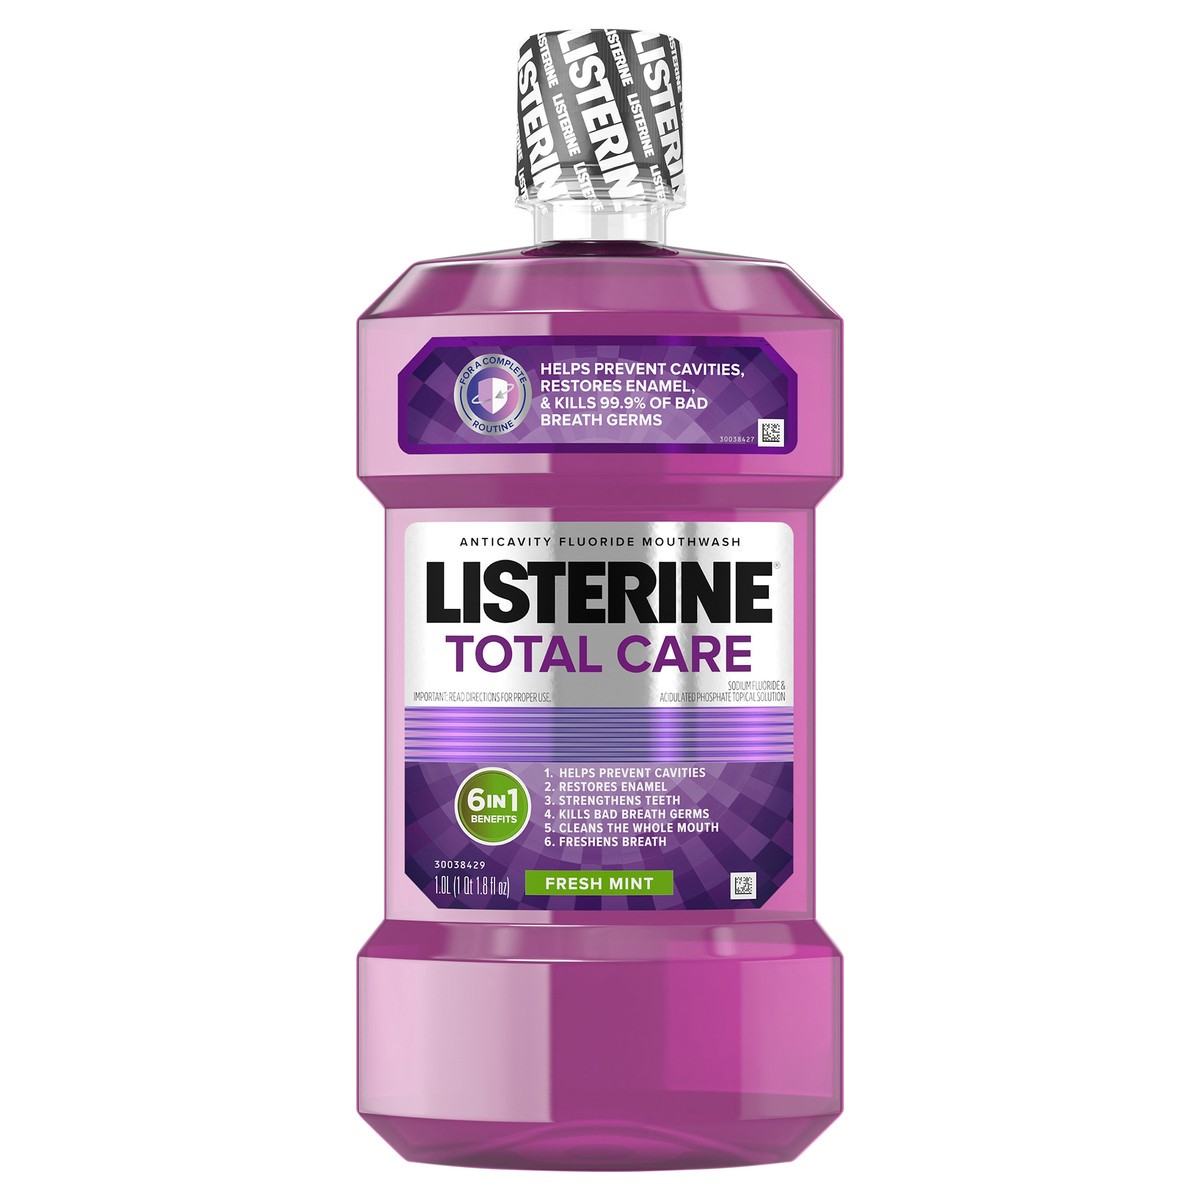 slide 1 of 10, Listerine Total Care Anticavity Fluoride Mouthwash, 6 Benefits in 1 Oral Rinse Helps Kill 99% of Bad Breath Germs, Prevents Cavities, Strengthens Teeth, ADA-Accepted, Fresh Mint, 1 L, 1 L